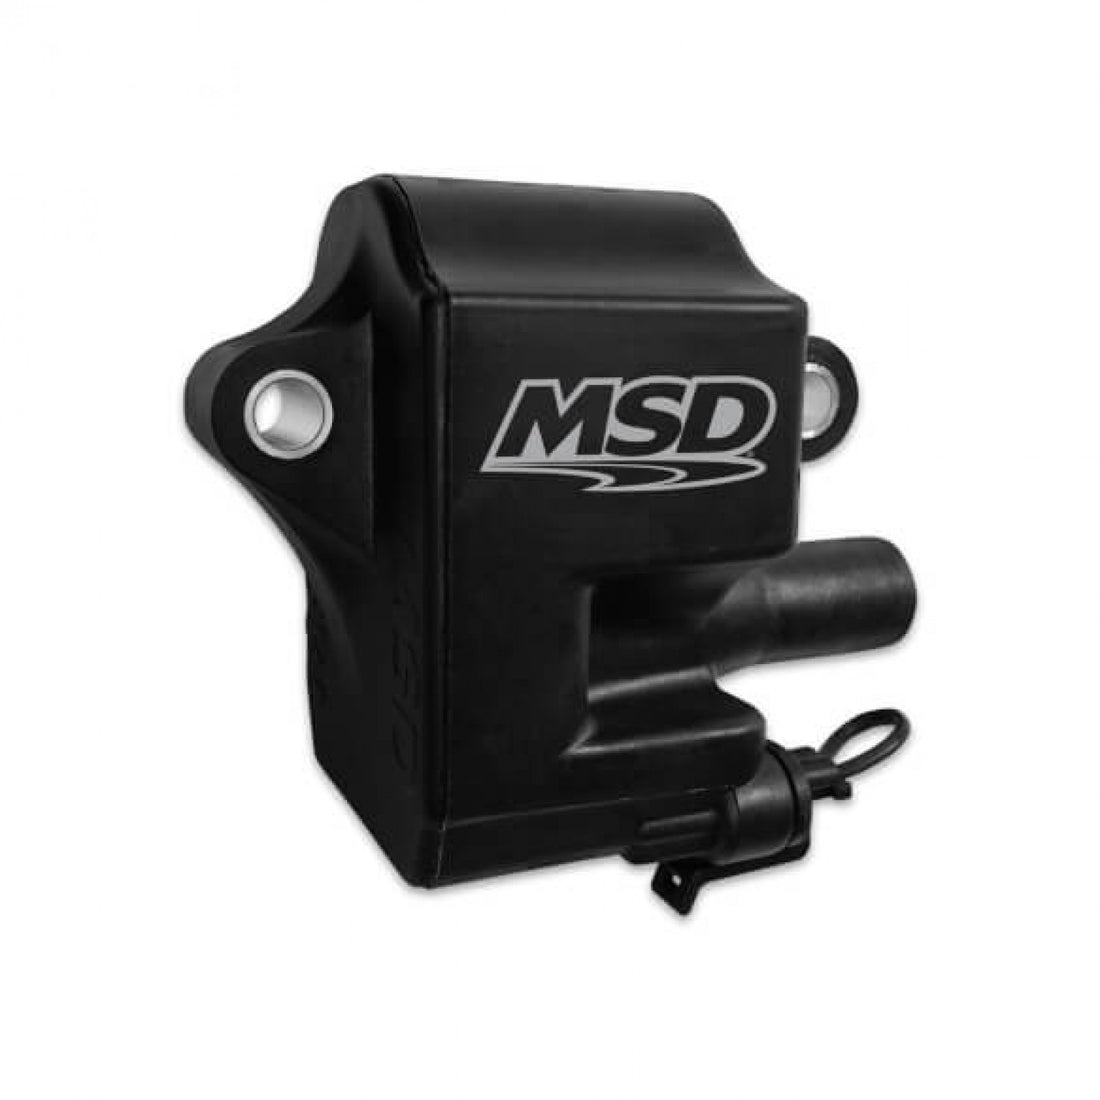 MSD Ignition Coil - Pro Power Series - GM LS1/LS6 Engines - Black